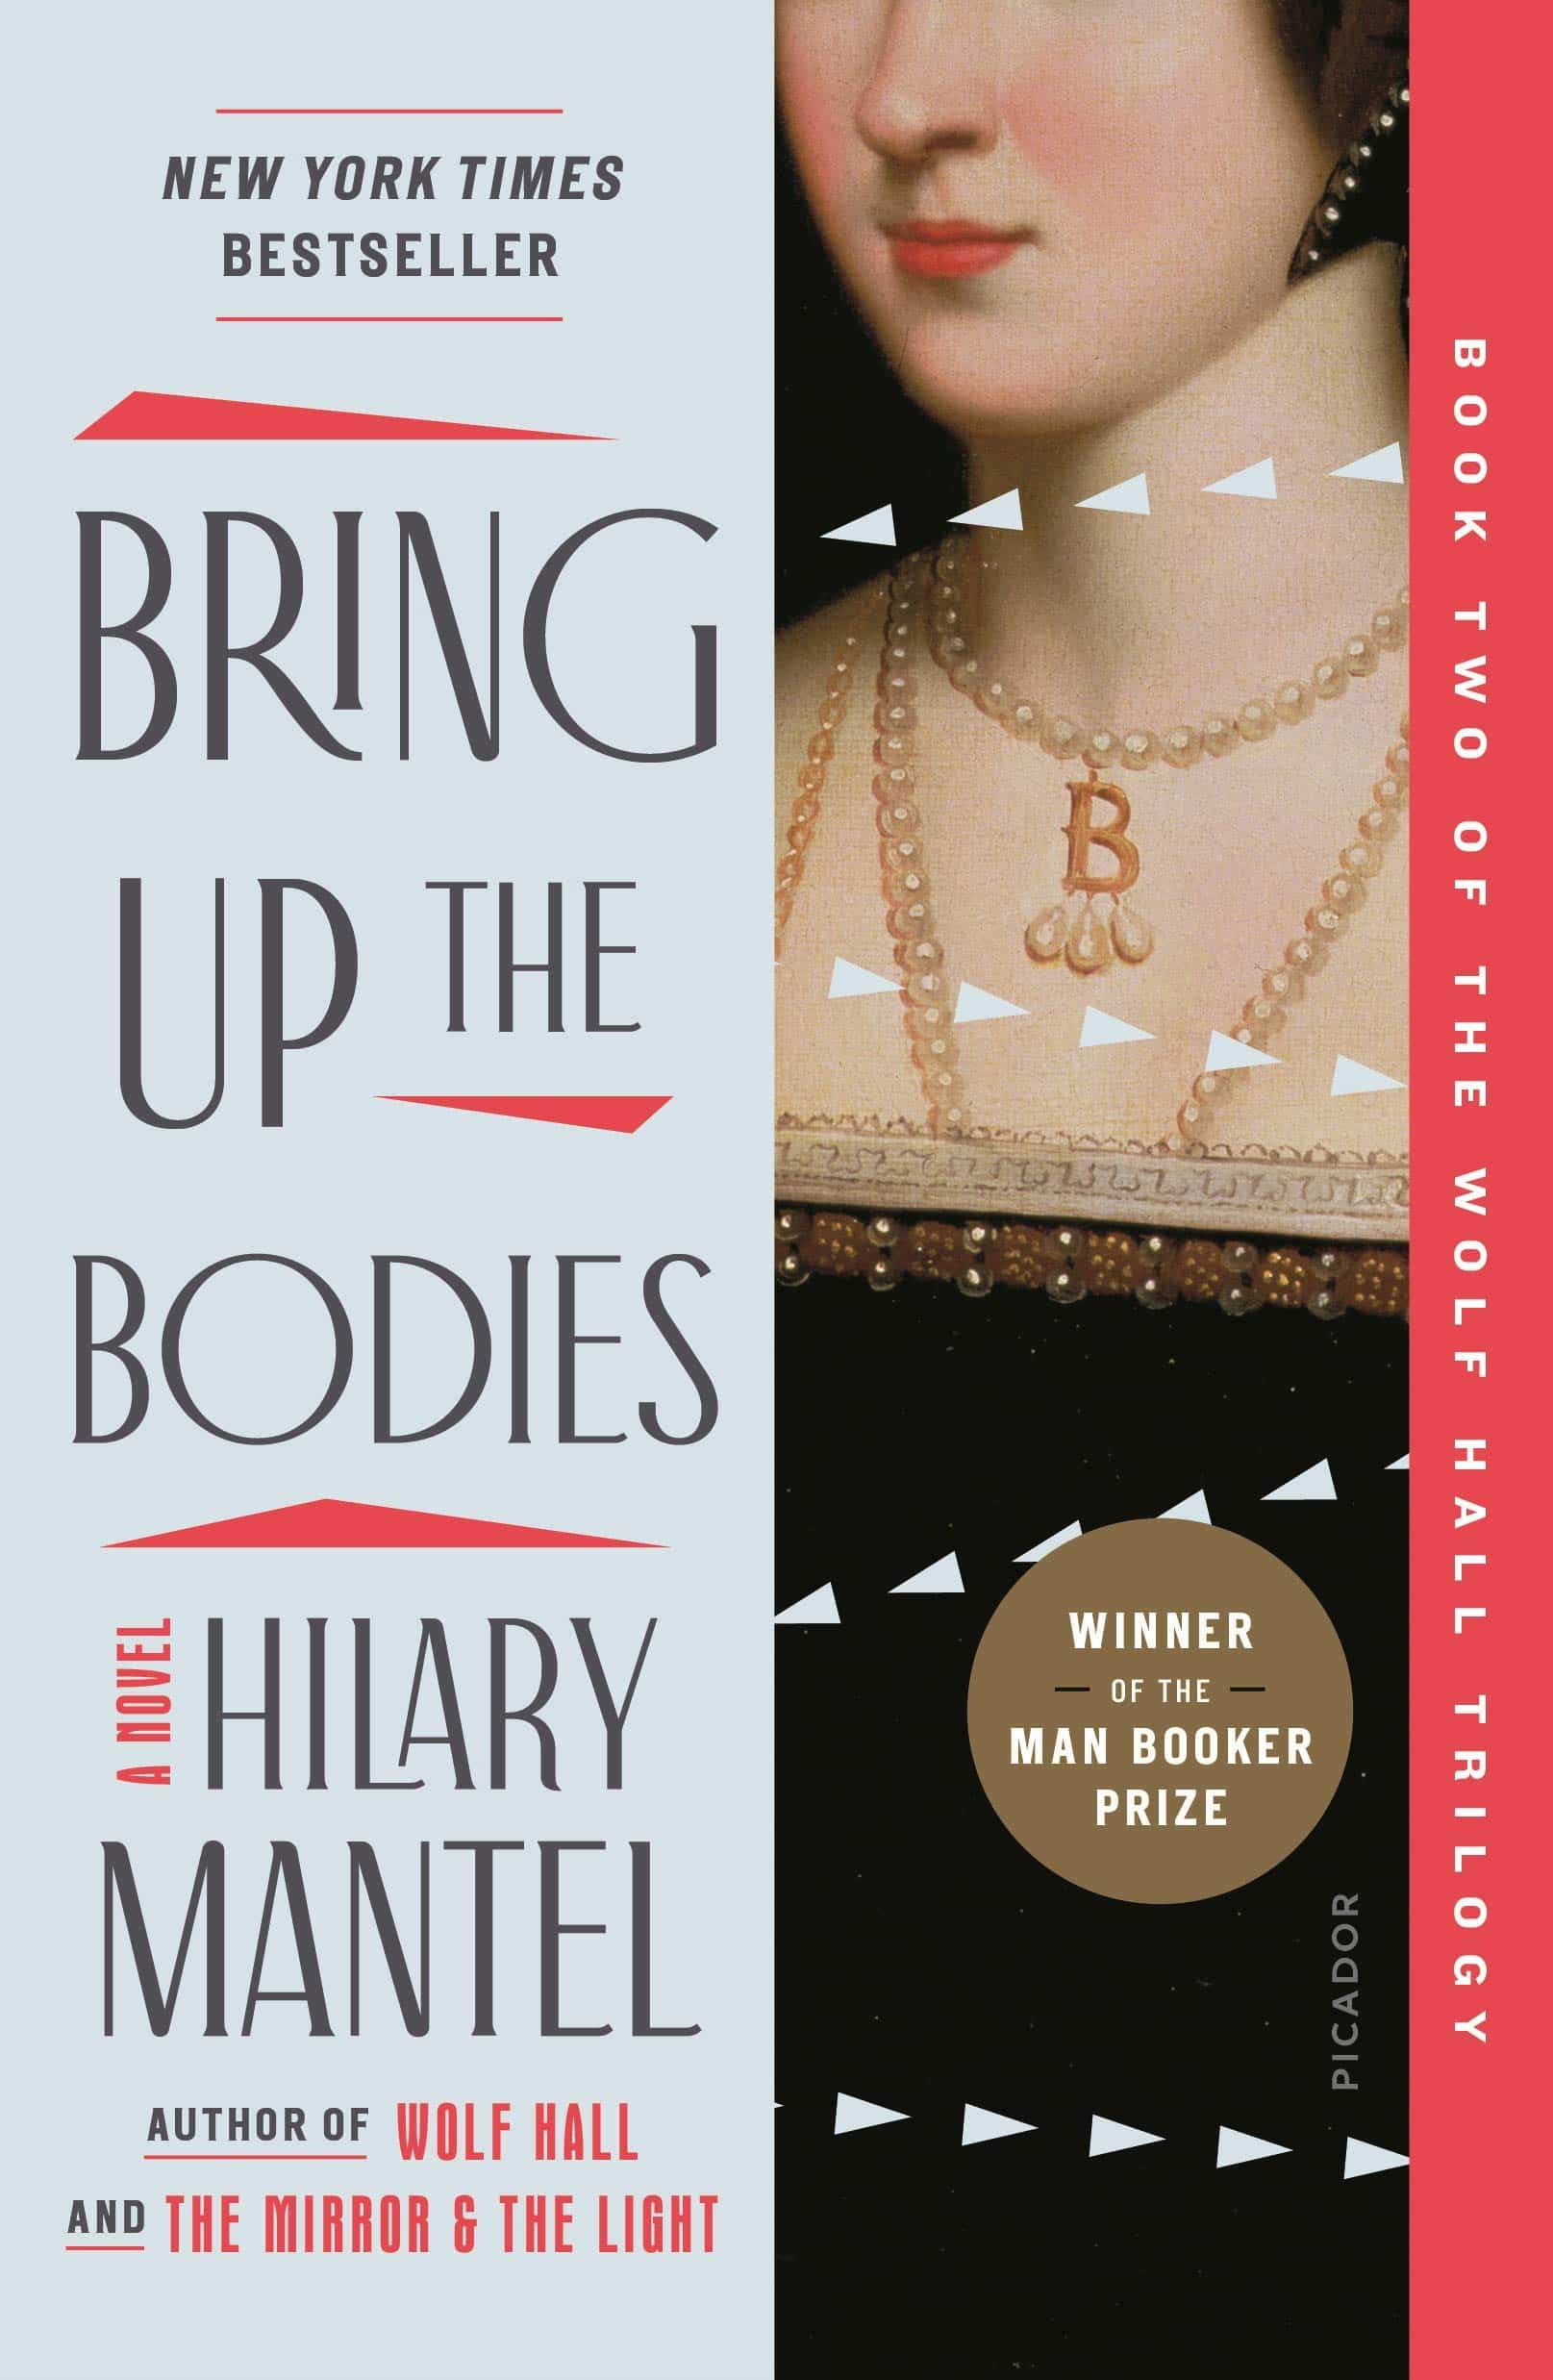 The cover of Bringing Up the Bodies